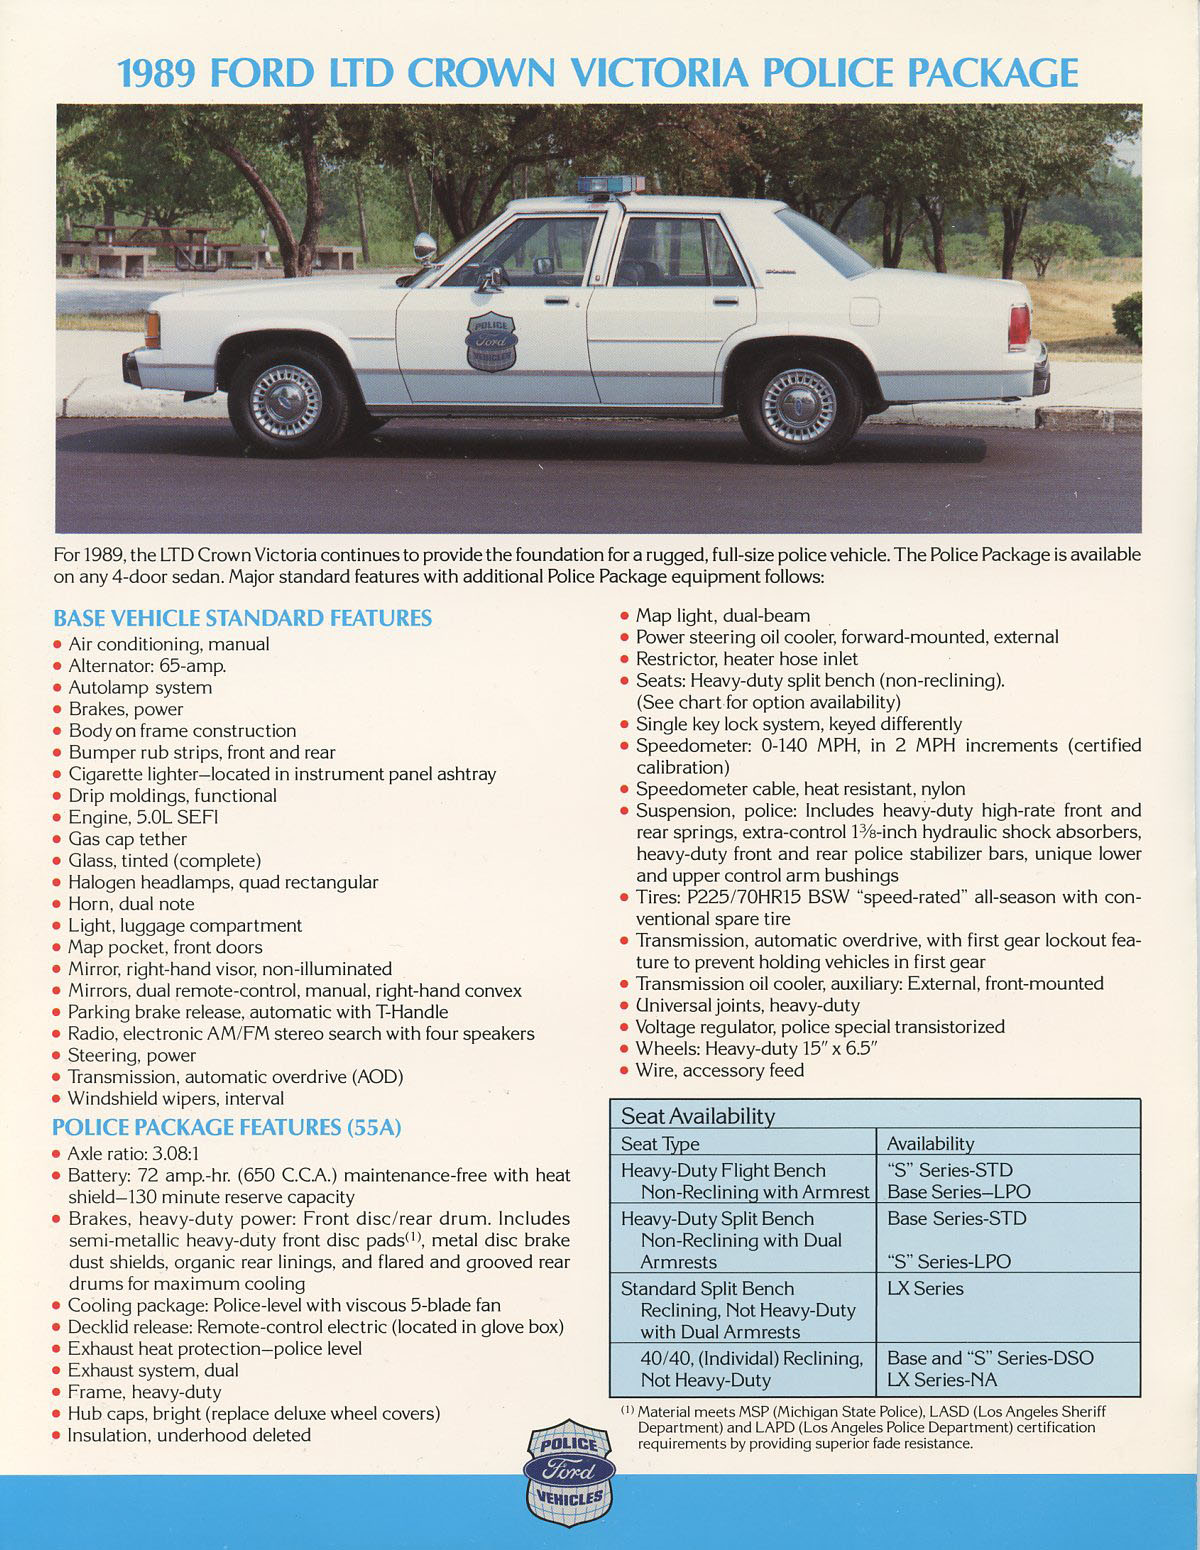 1989_Ford_Police_Package-02